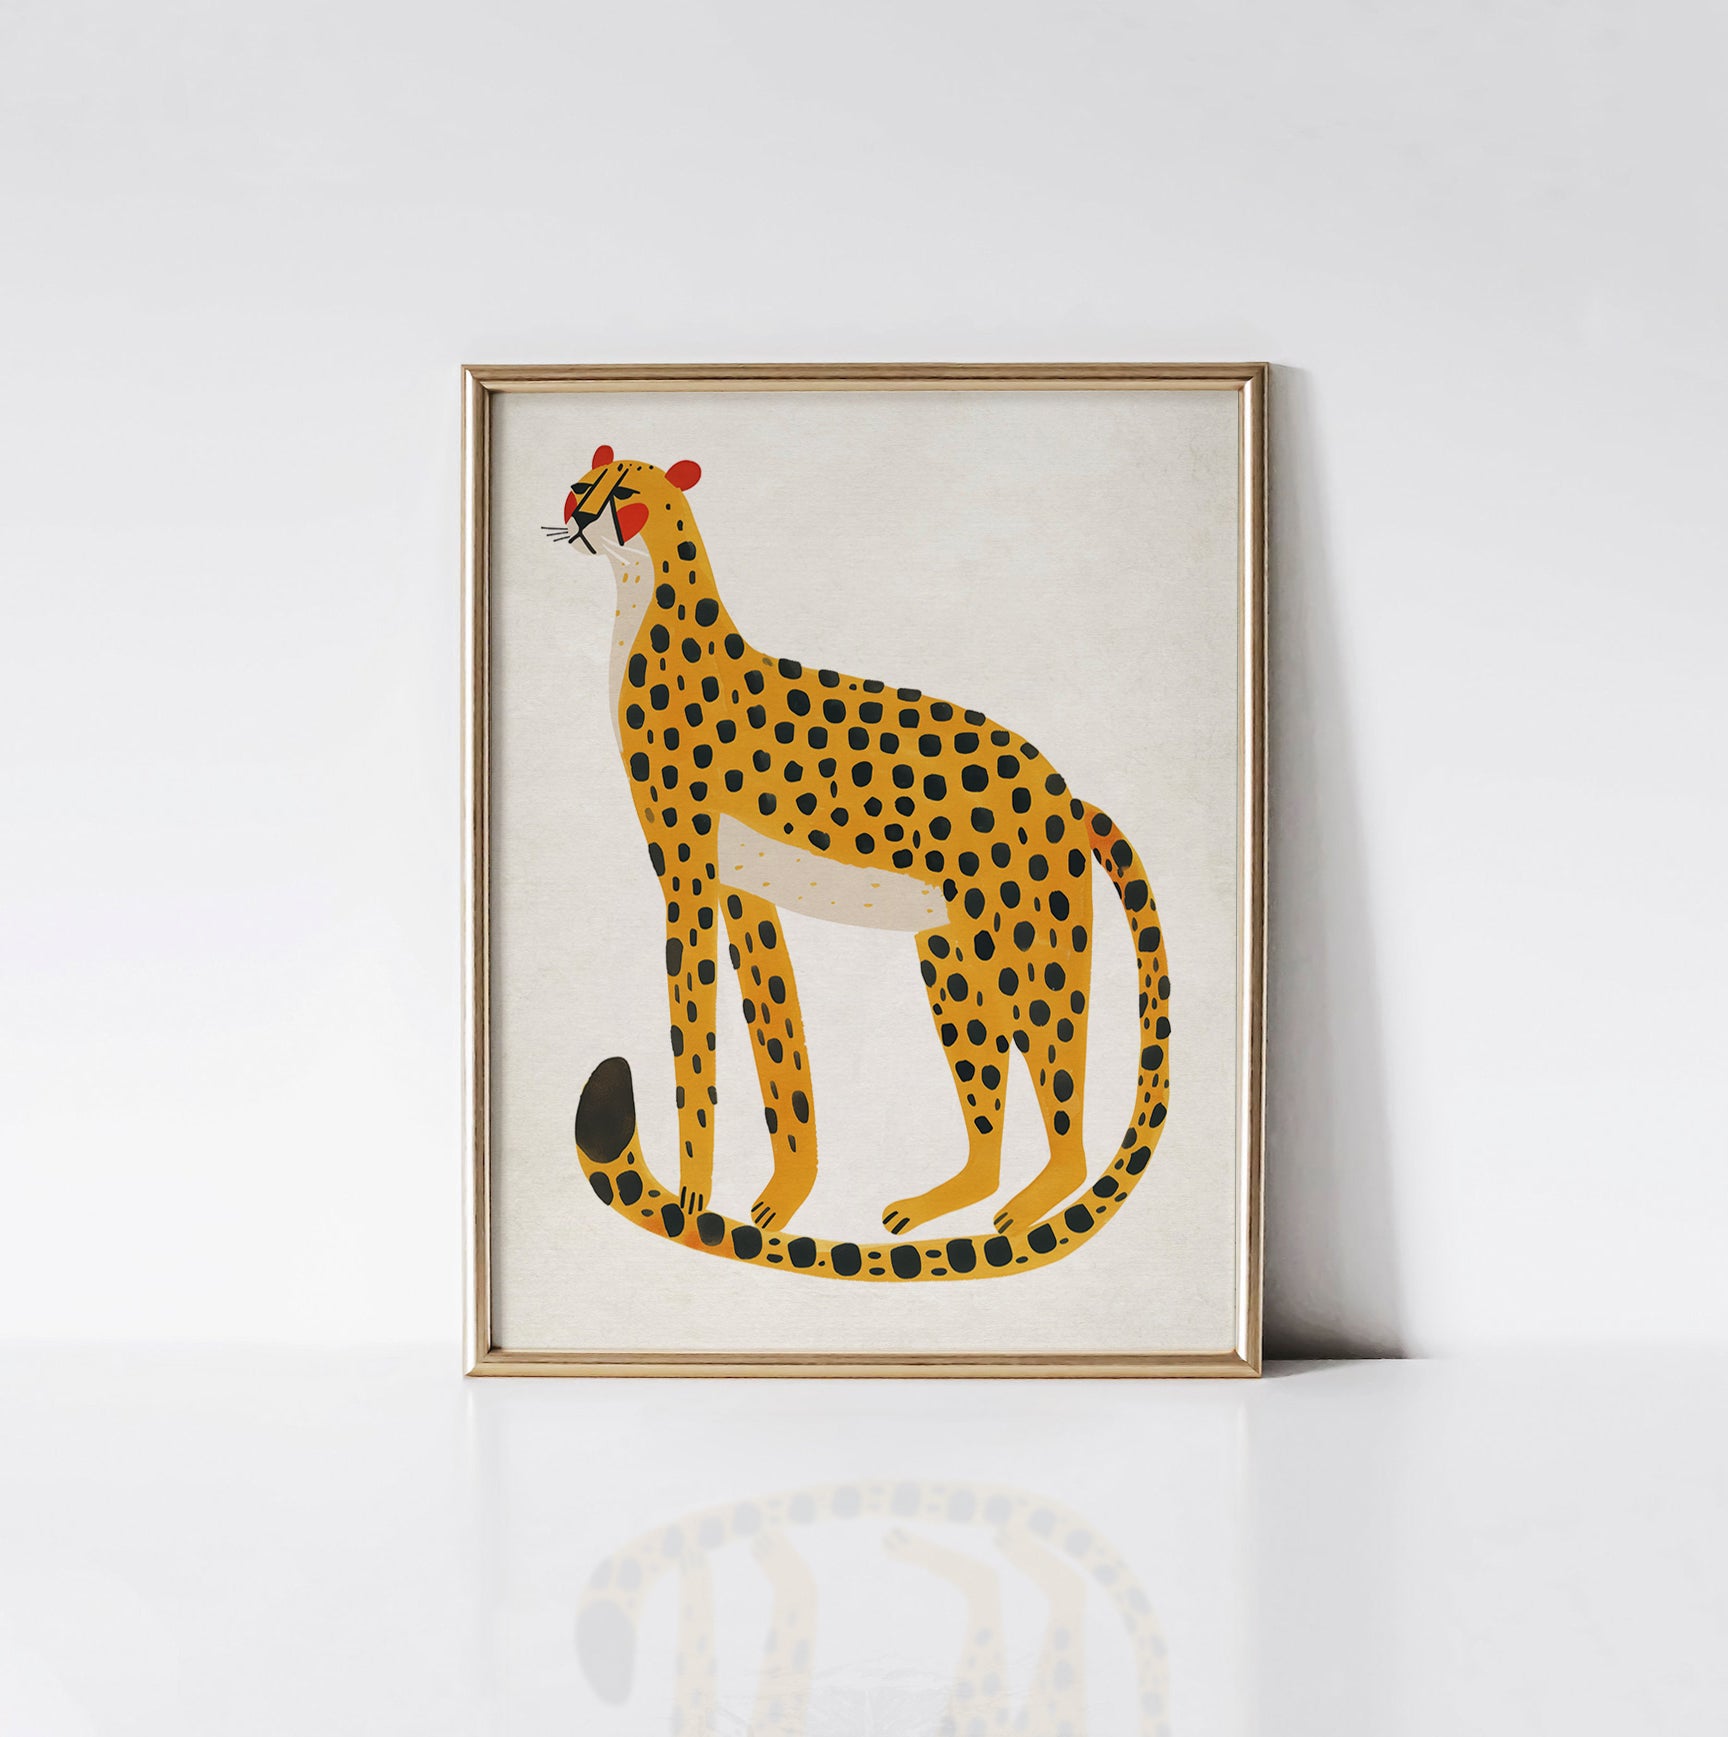 Bold Cheetah Art Print from Timberlea Interiors Kids Art Print Collection displayed in a gold frame, showcasing a vivid yellow and black cheetah illustration.